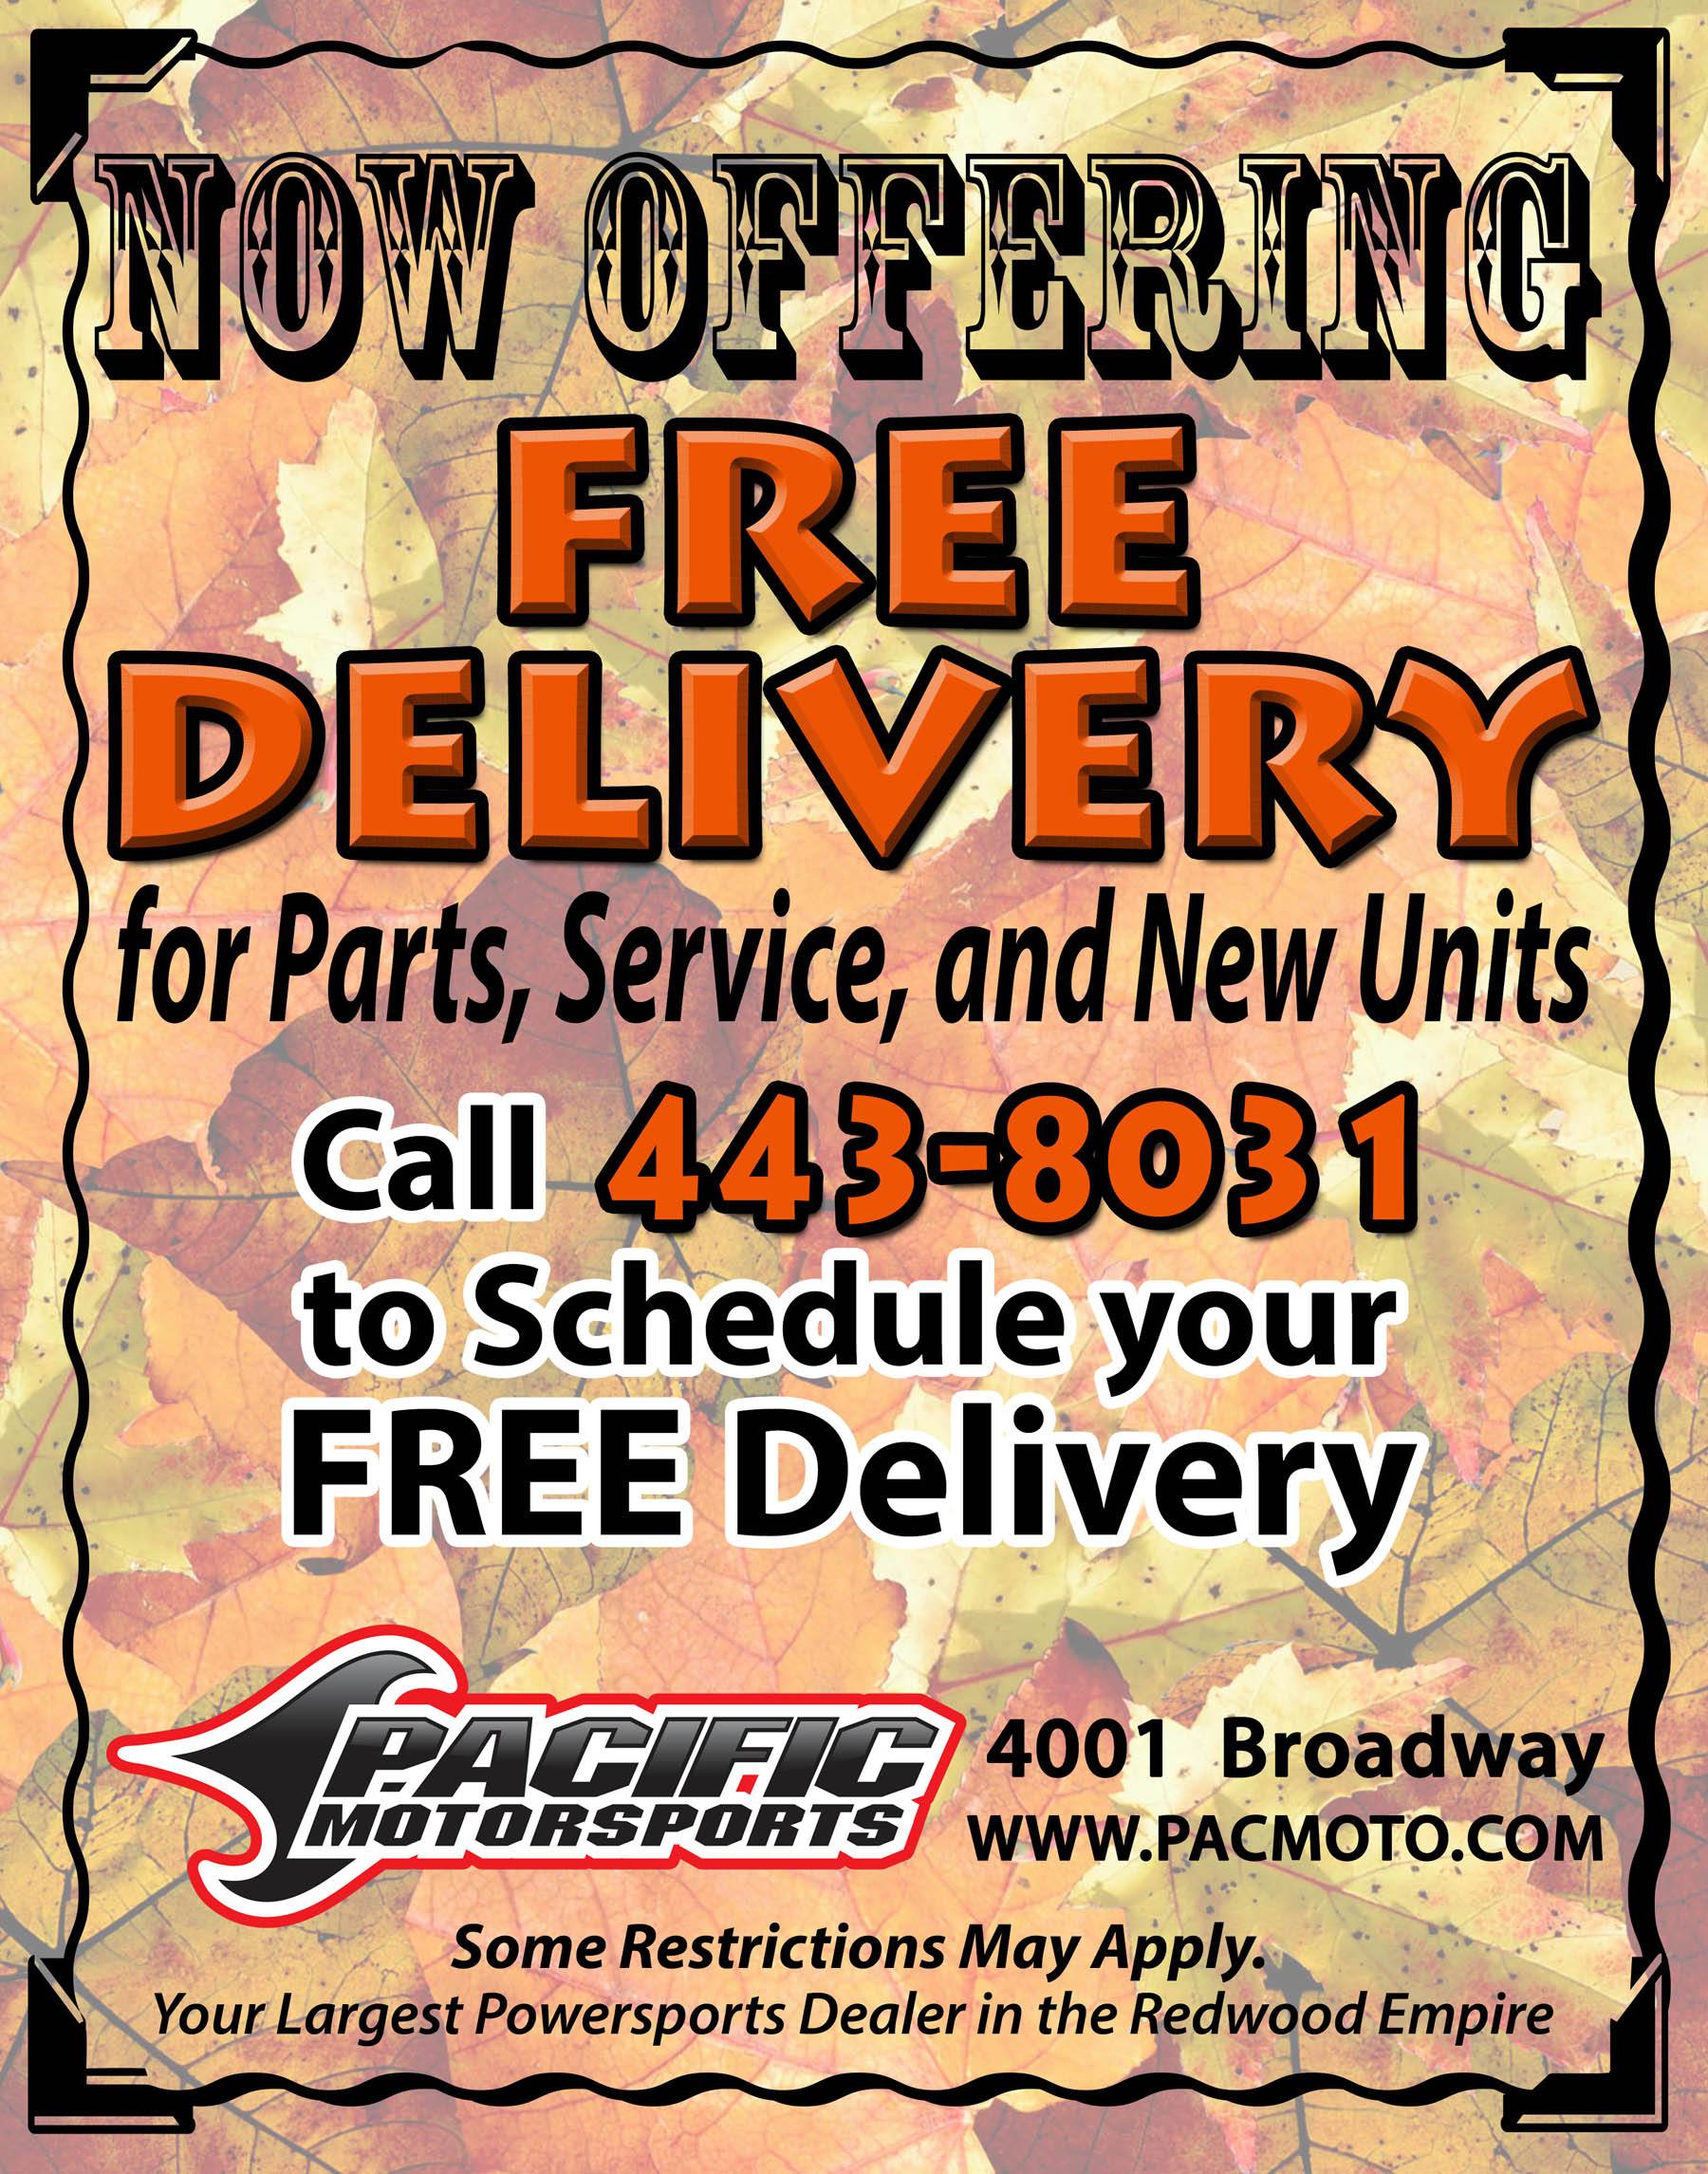 Free delivery offered at Pacific Motorsports